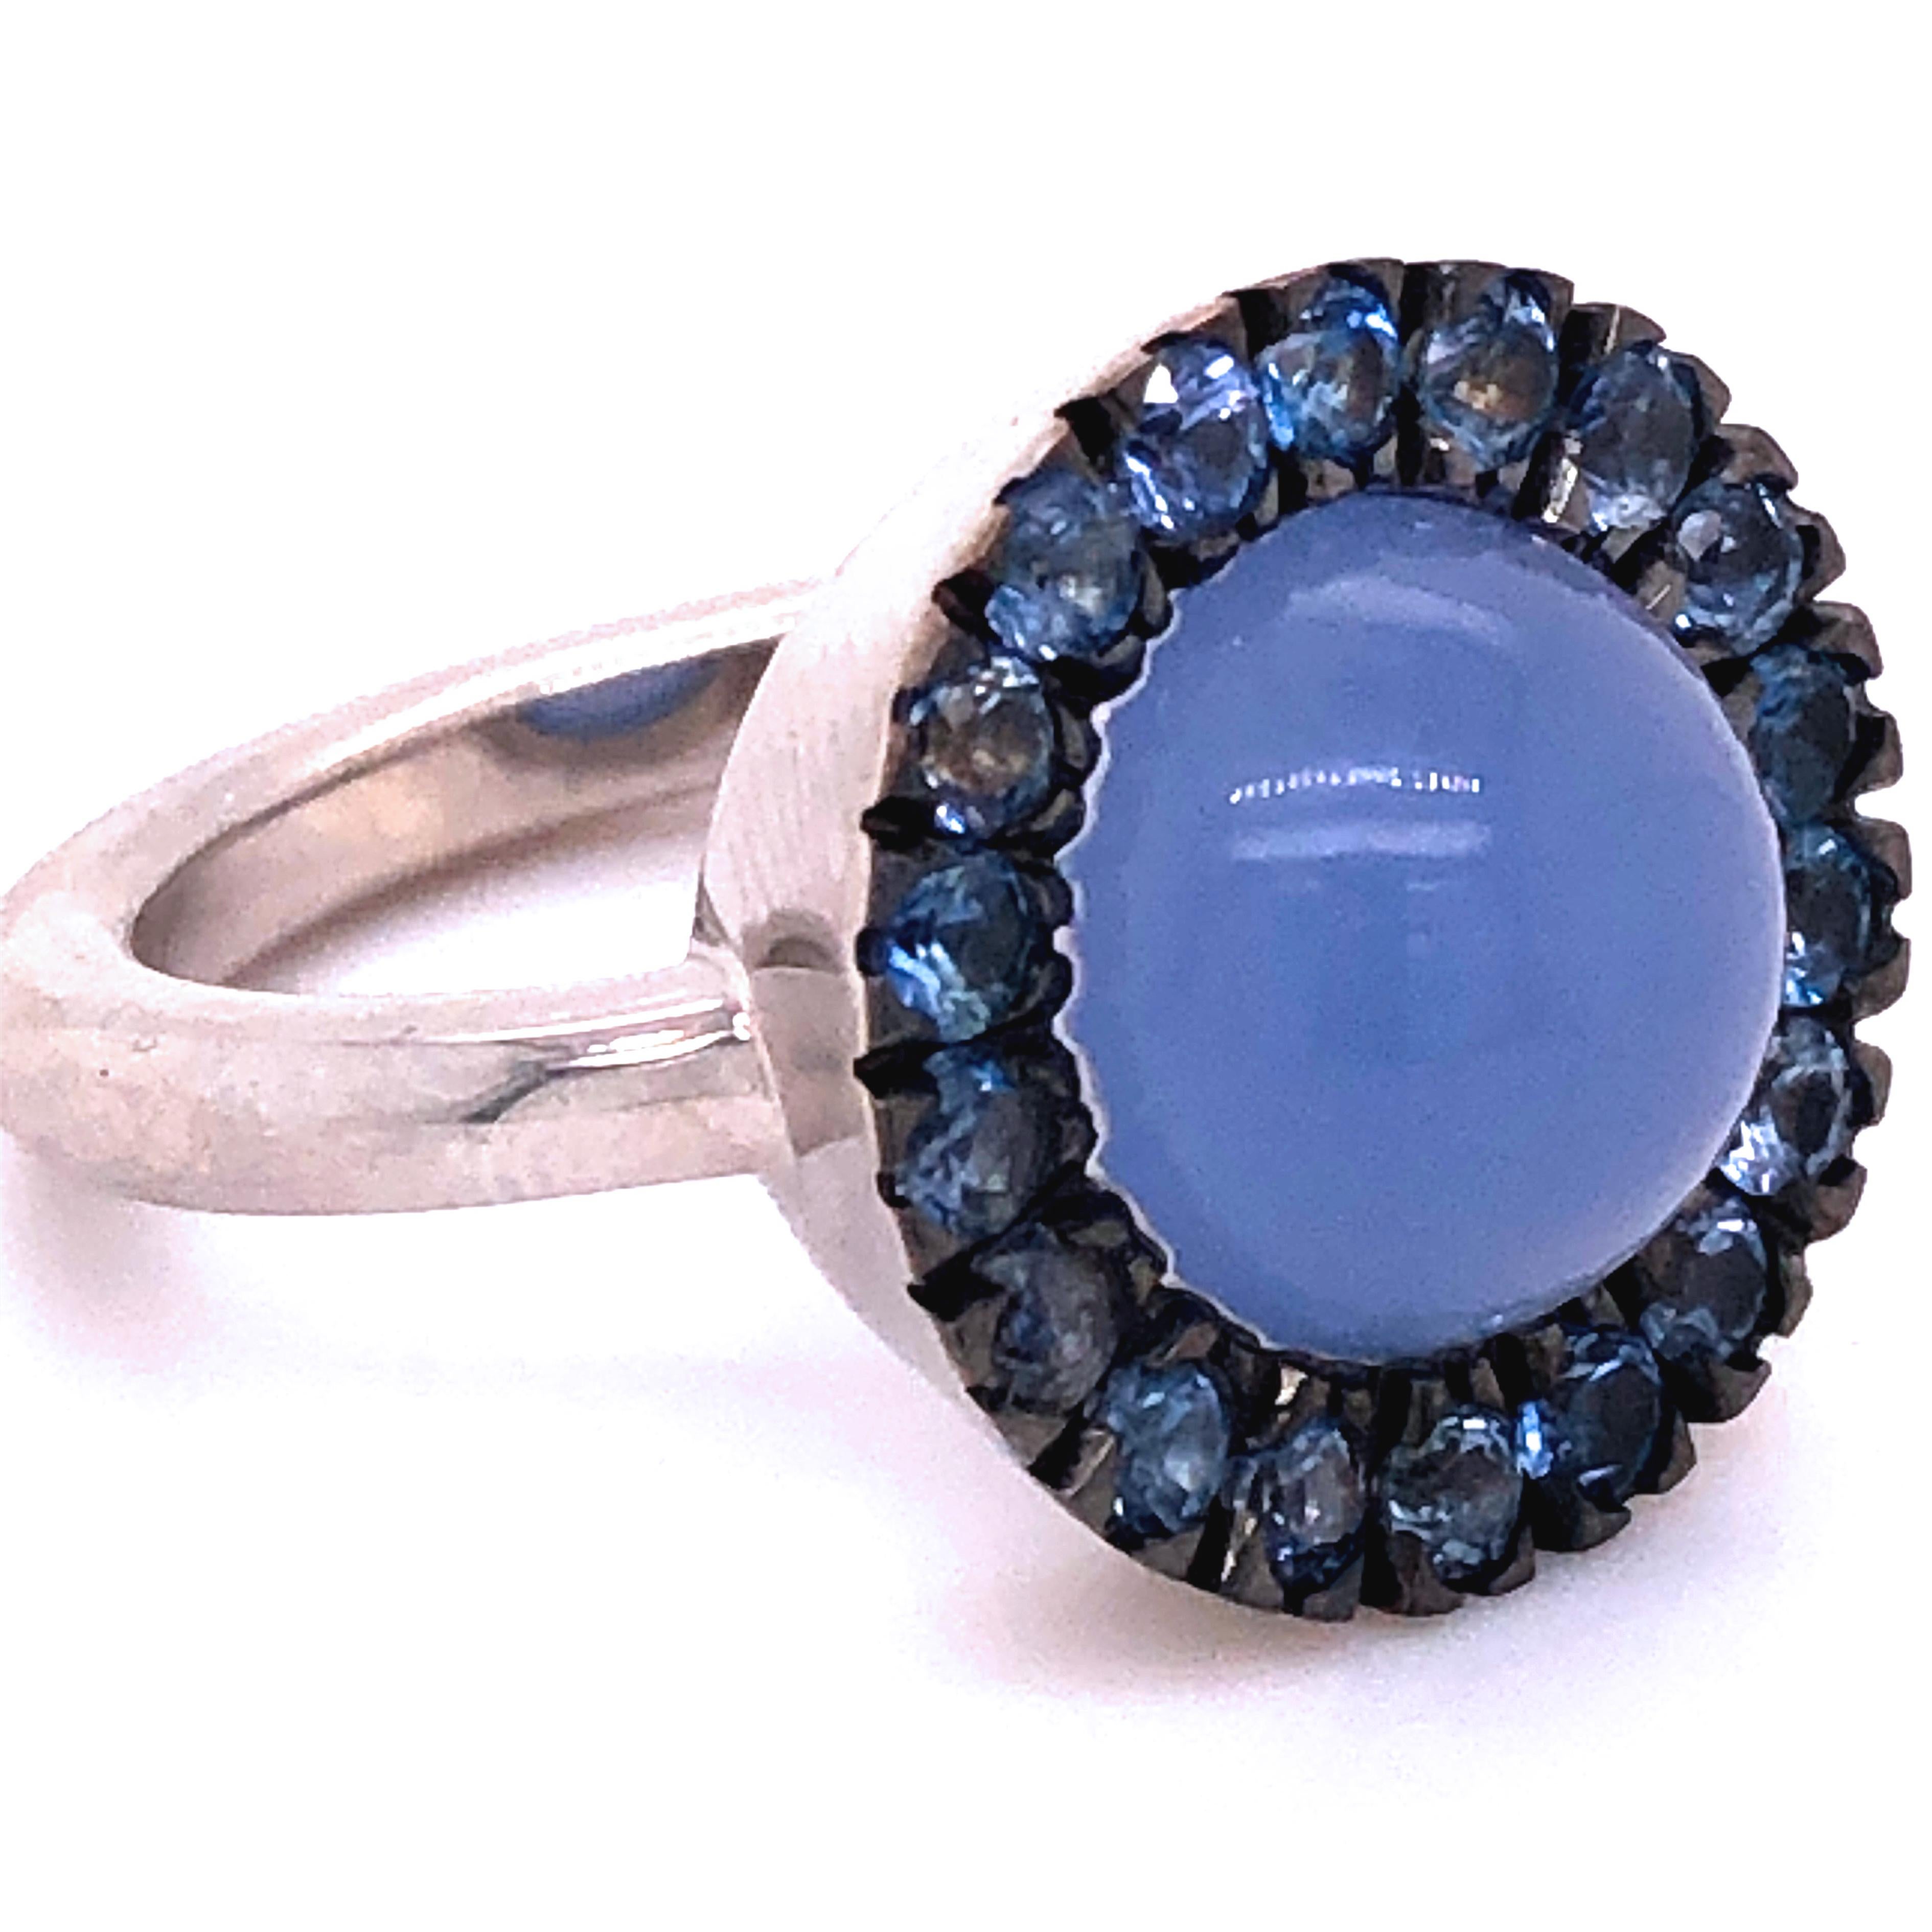 Chic, Unique yet Timeless Contemporary Cocktail Ring featuring a Natural 6.5Kt Blue Chalcedony Round Cabochon surrounded by 1.45Kt Natural Vivid Blue Sapphire in an elegant White Gold contemporary Halo Setting: a Magical, Mesmerizing Piece.
In our